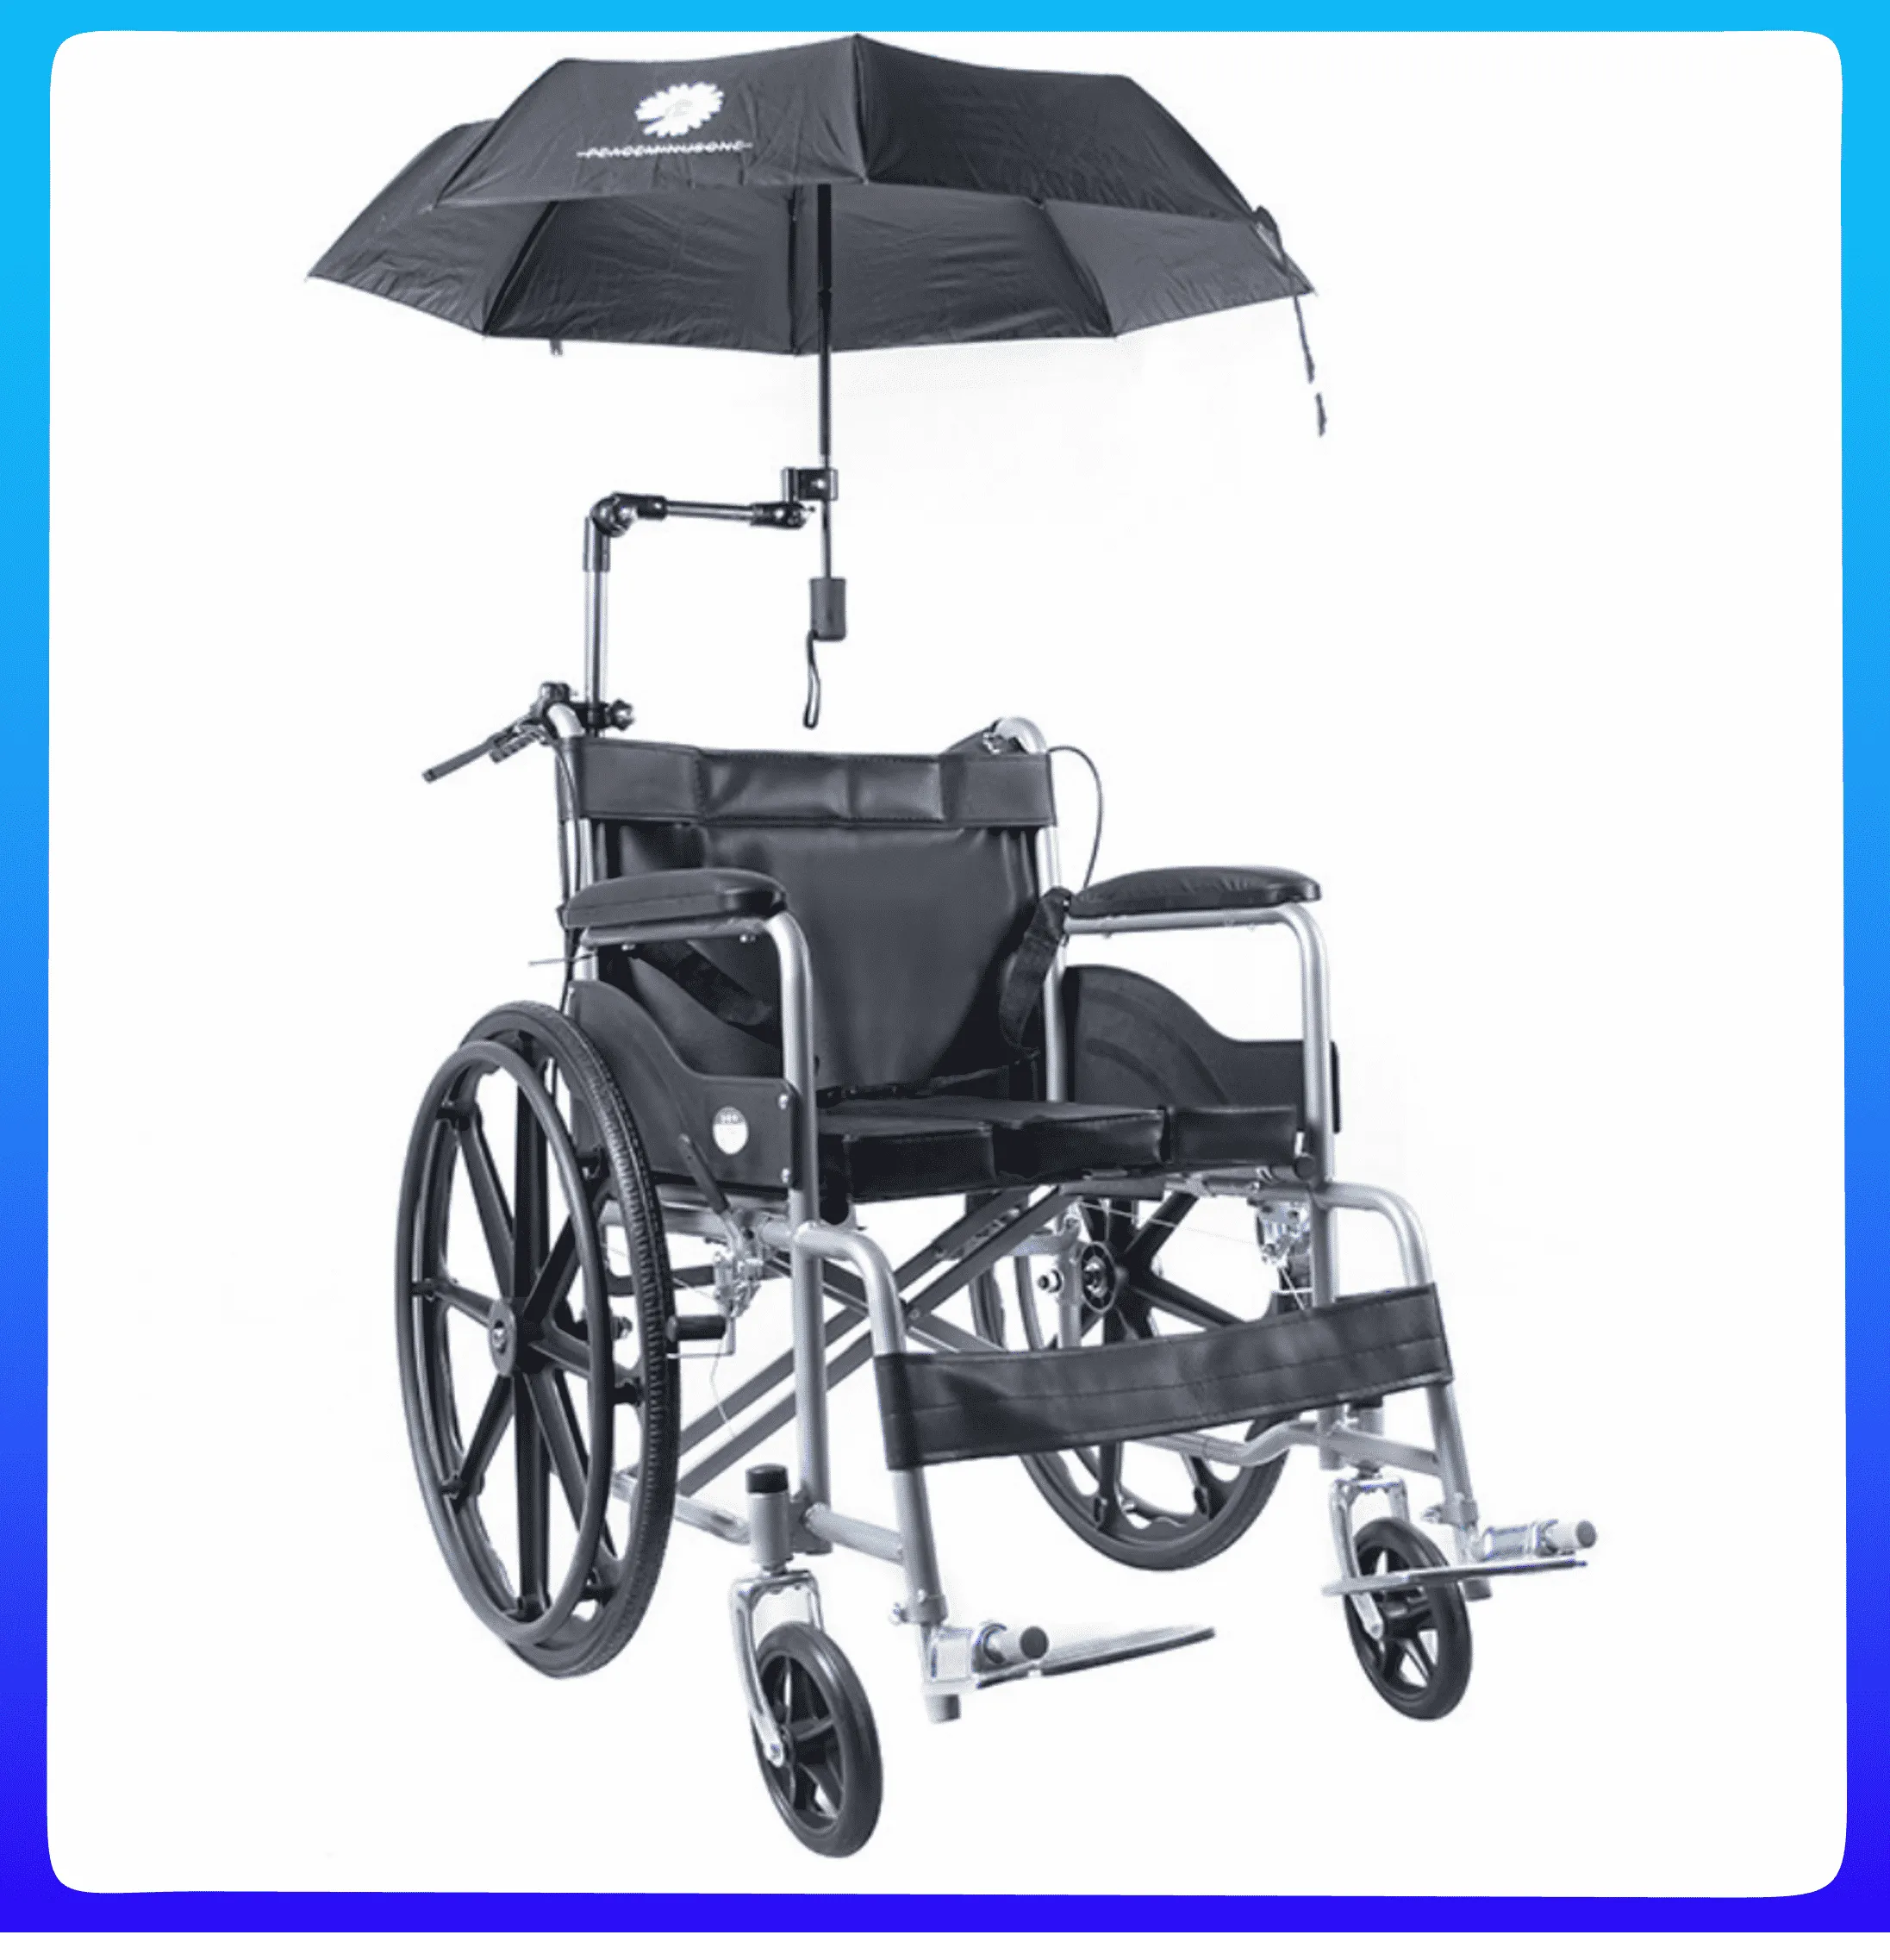 Wheelchair Accessories  Umbrella For chair Stroller 360° Adjustable Umbrella Stretch Mount Stand for Rolling Chair wheelchair